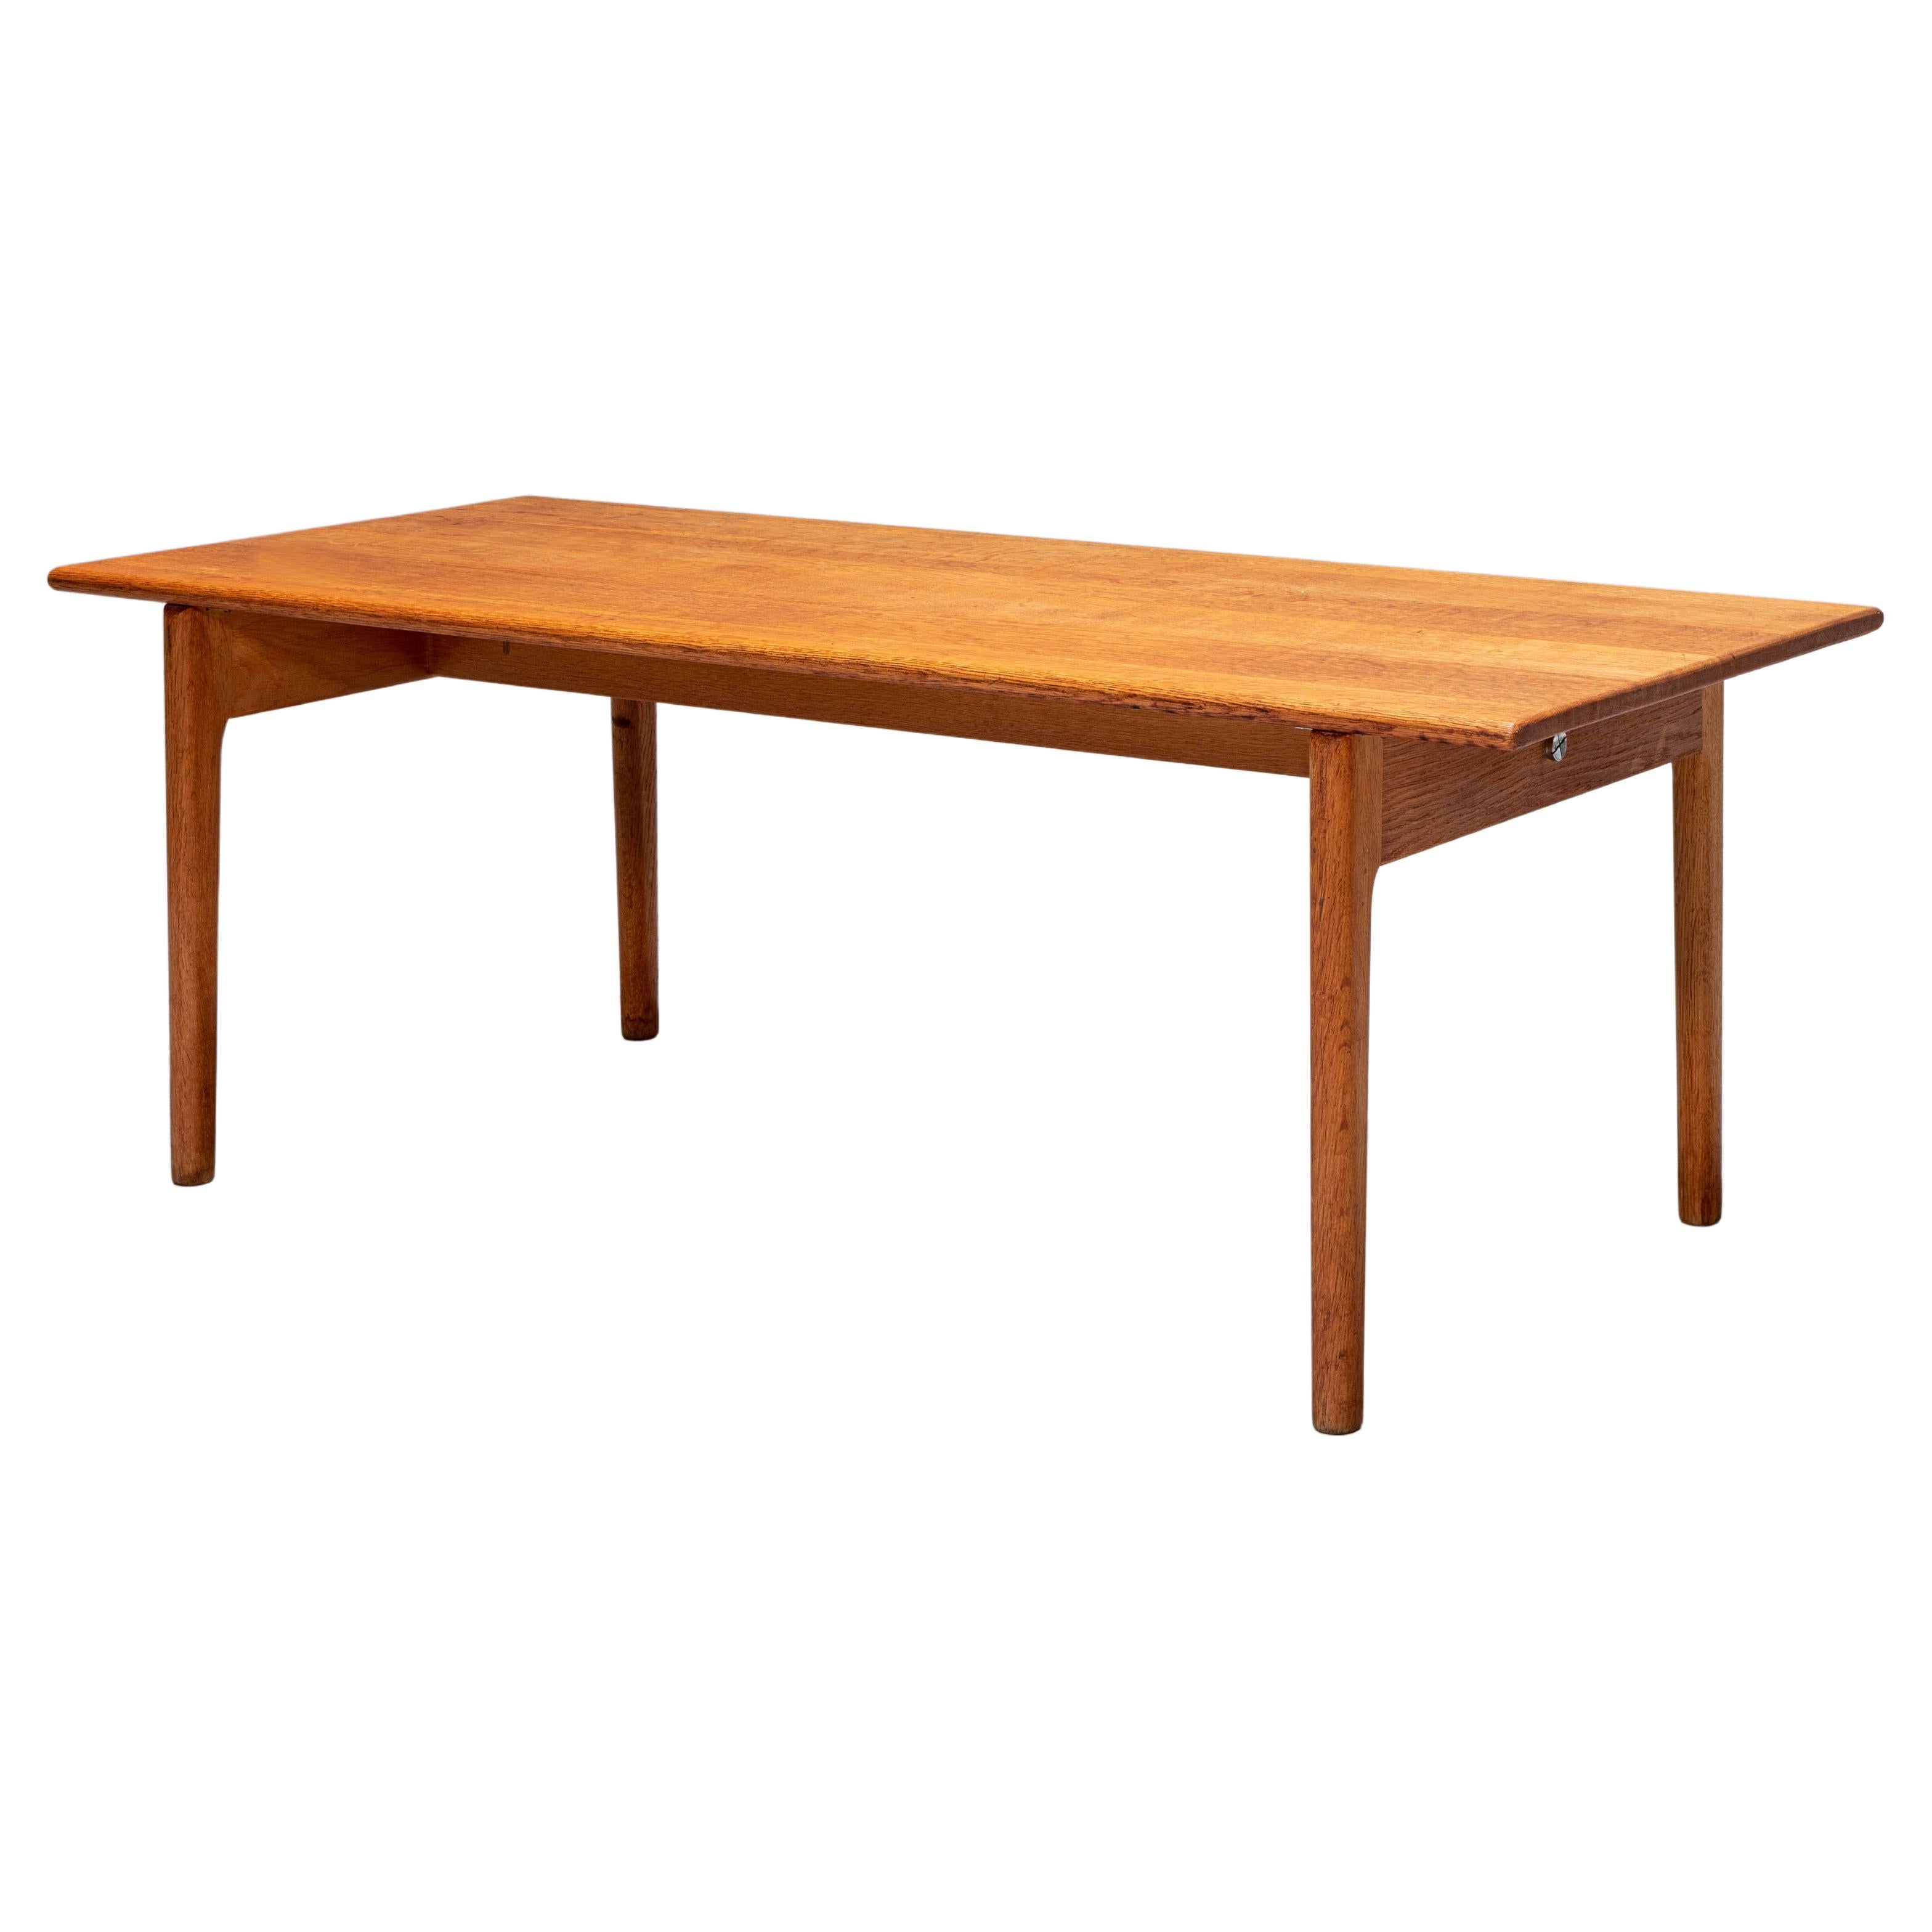 Hans Wegner AT-15 Coffee Table by Andreas Tuck in solid Oak, Denmark, 1960's For Sale